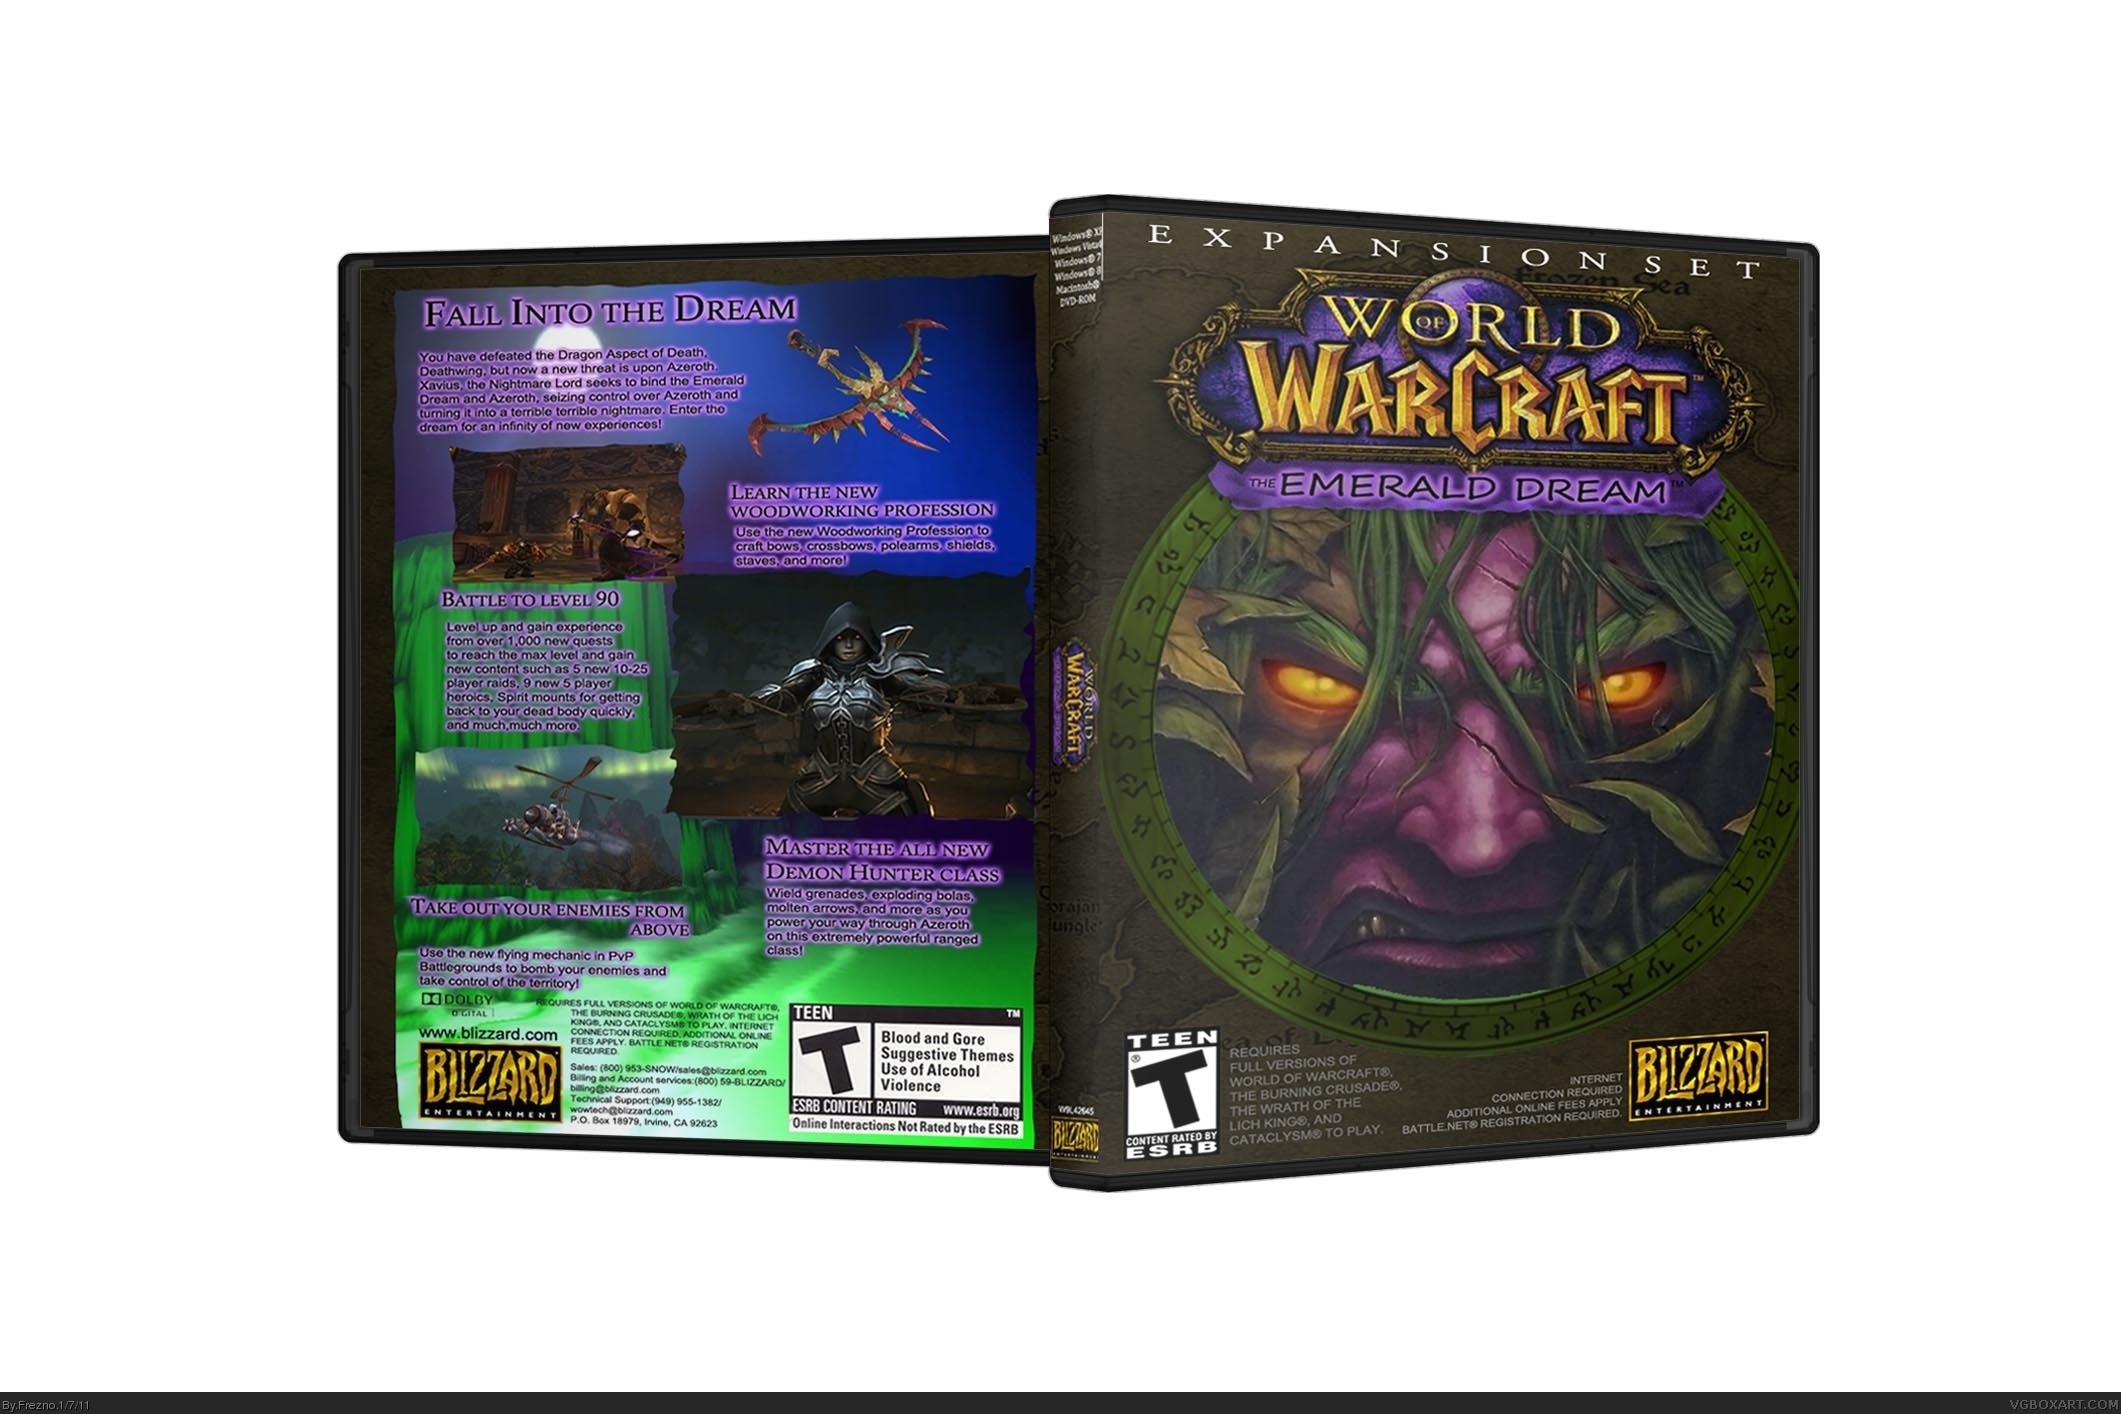 World of Warcraft: The Emerald Dream box cover